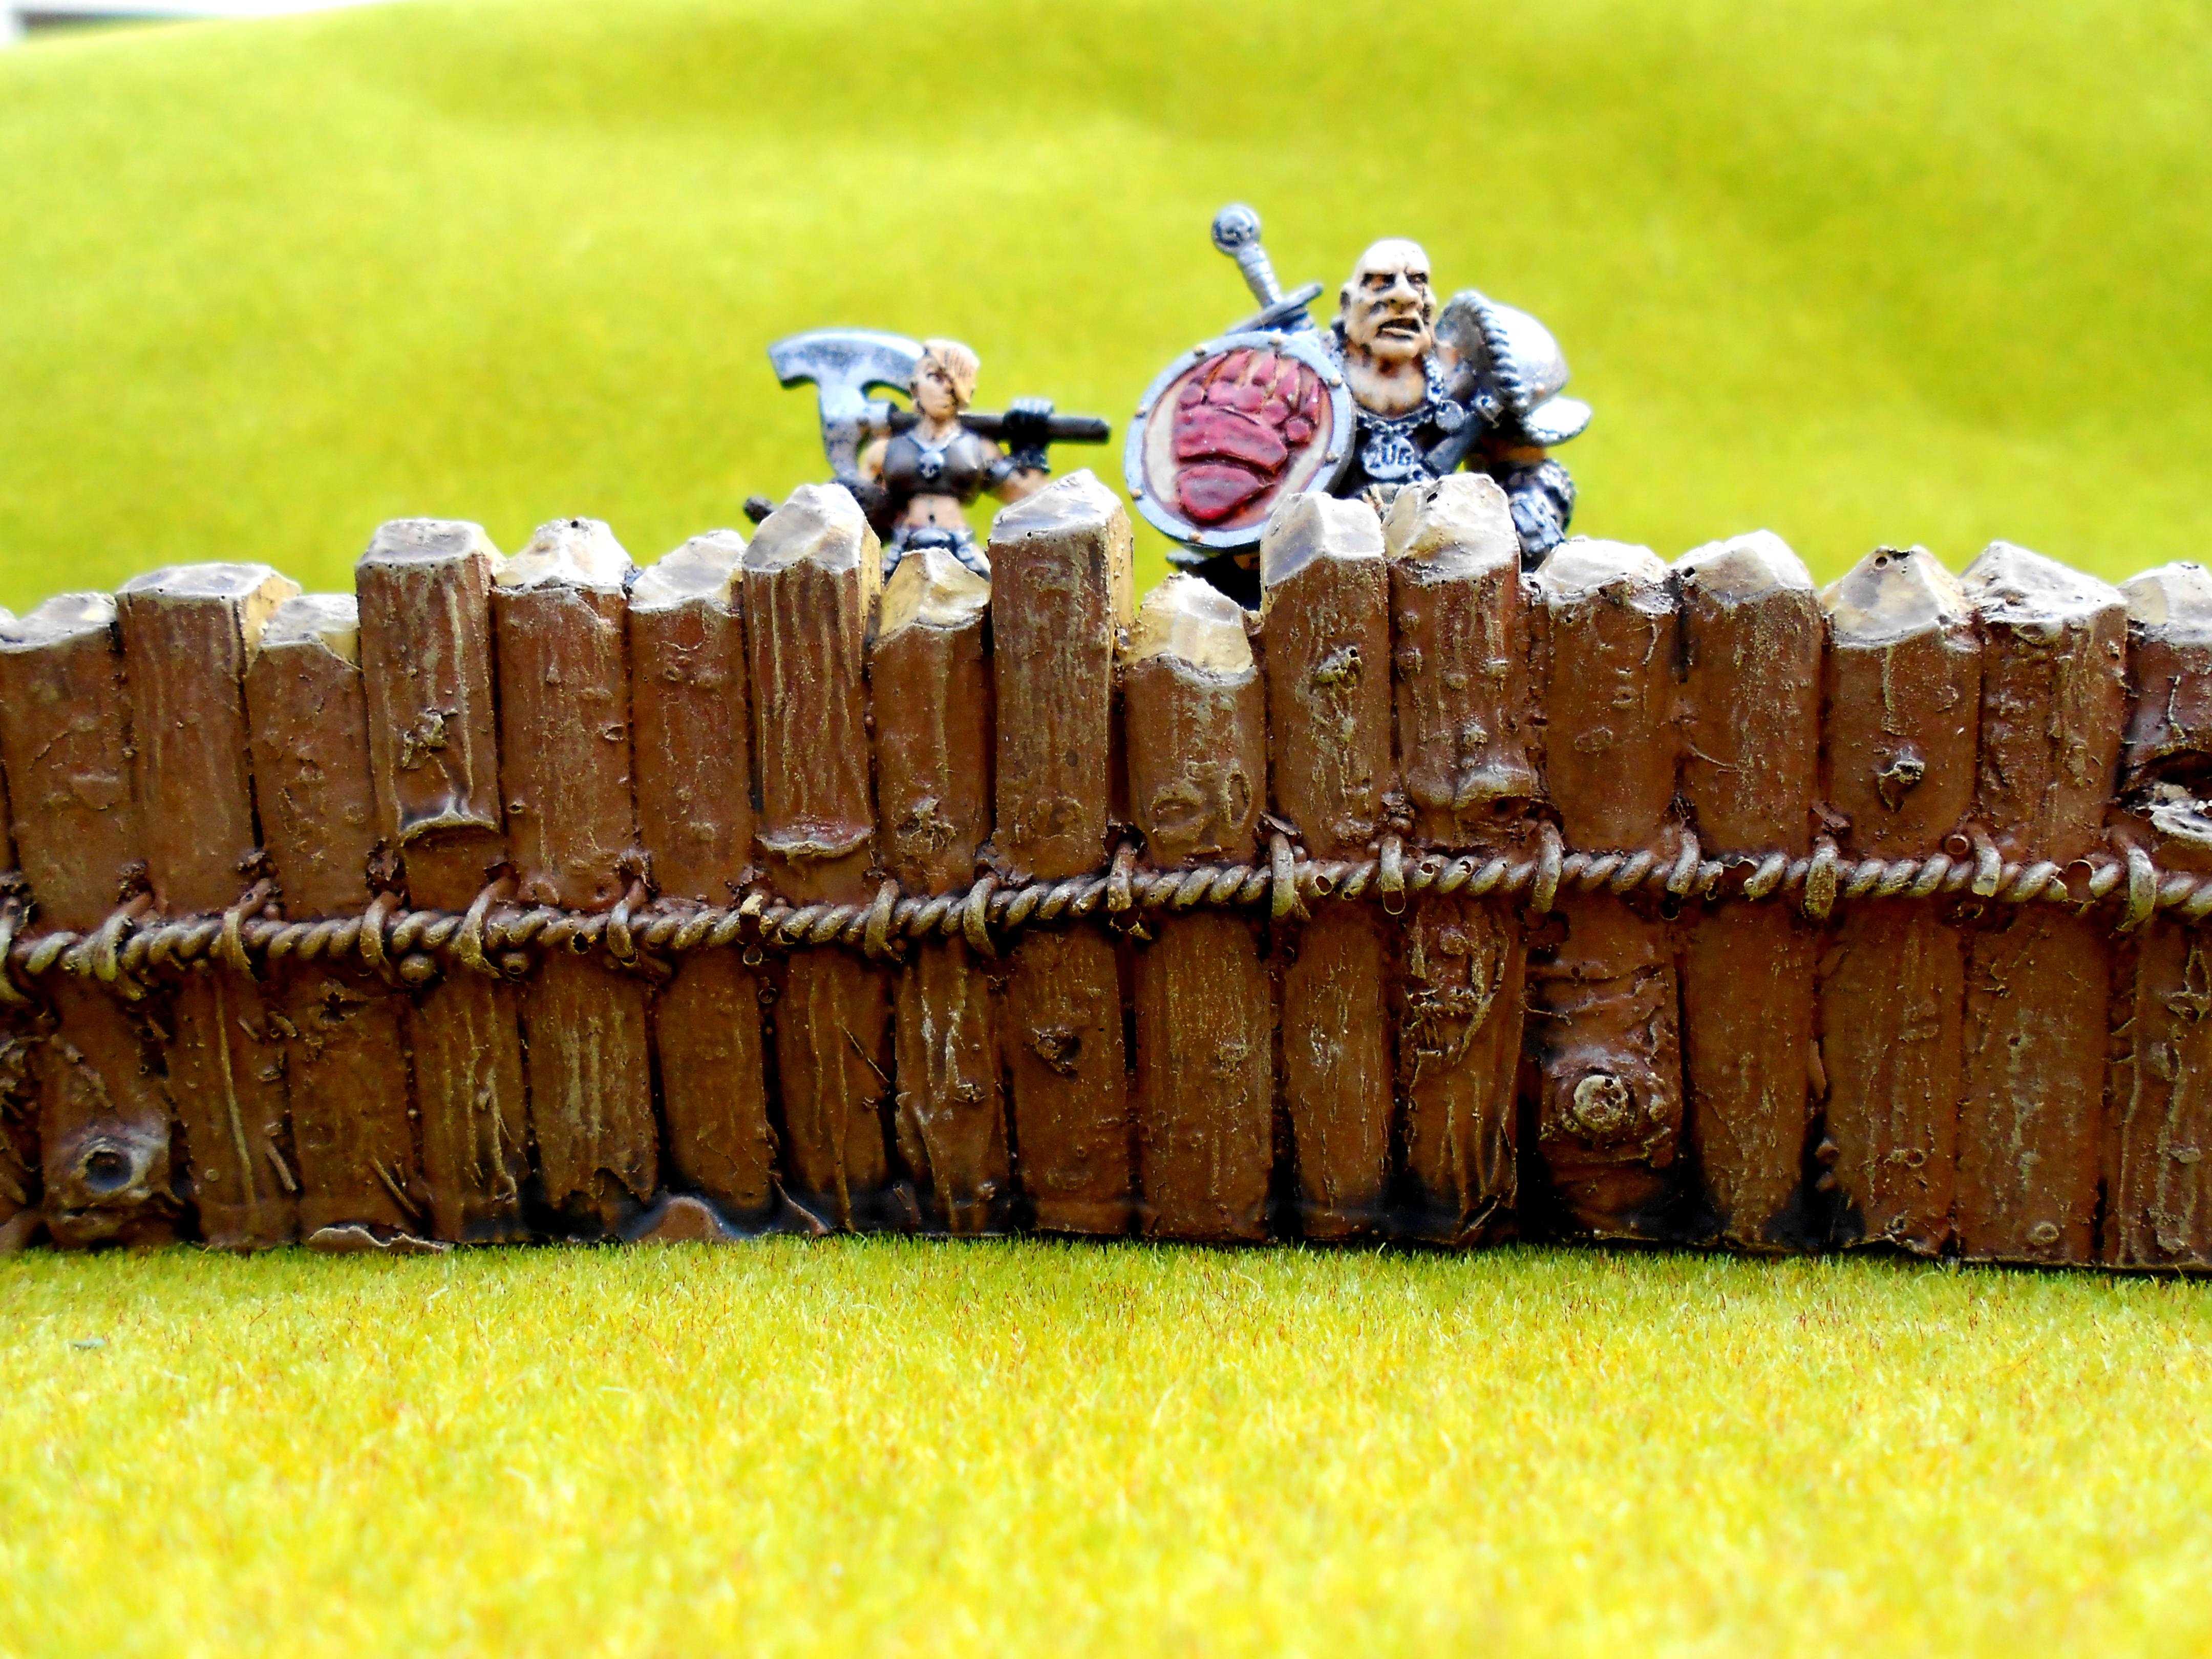 28mm, 35mm, Barricades, Dungeon, Fantasius, Fantasy Scenery, Fortress, Hand Cast, Keep, Mordheim, New, Palisade, Parapets, Rare, Resin, Roleplay, Rpg, Science-fiction, Terrain, Walls, Wargames Bakery, Wargamesbakery, Wargamesbakery.co.uk, Warhammer Fantasy, Wgb